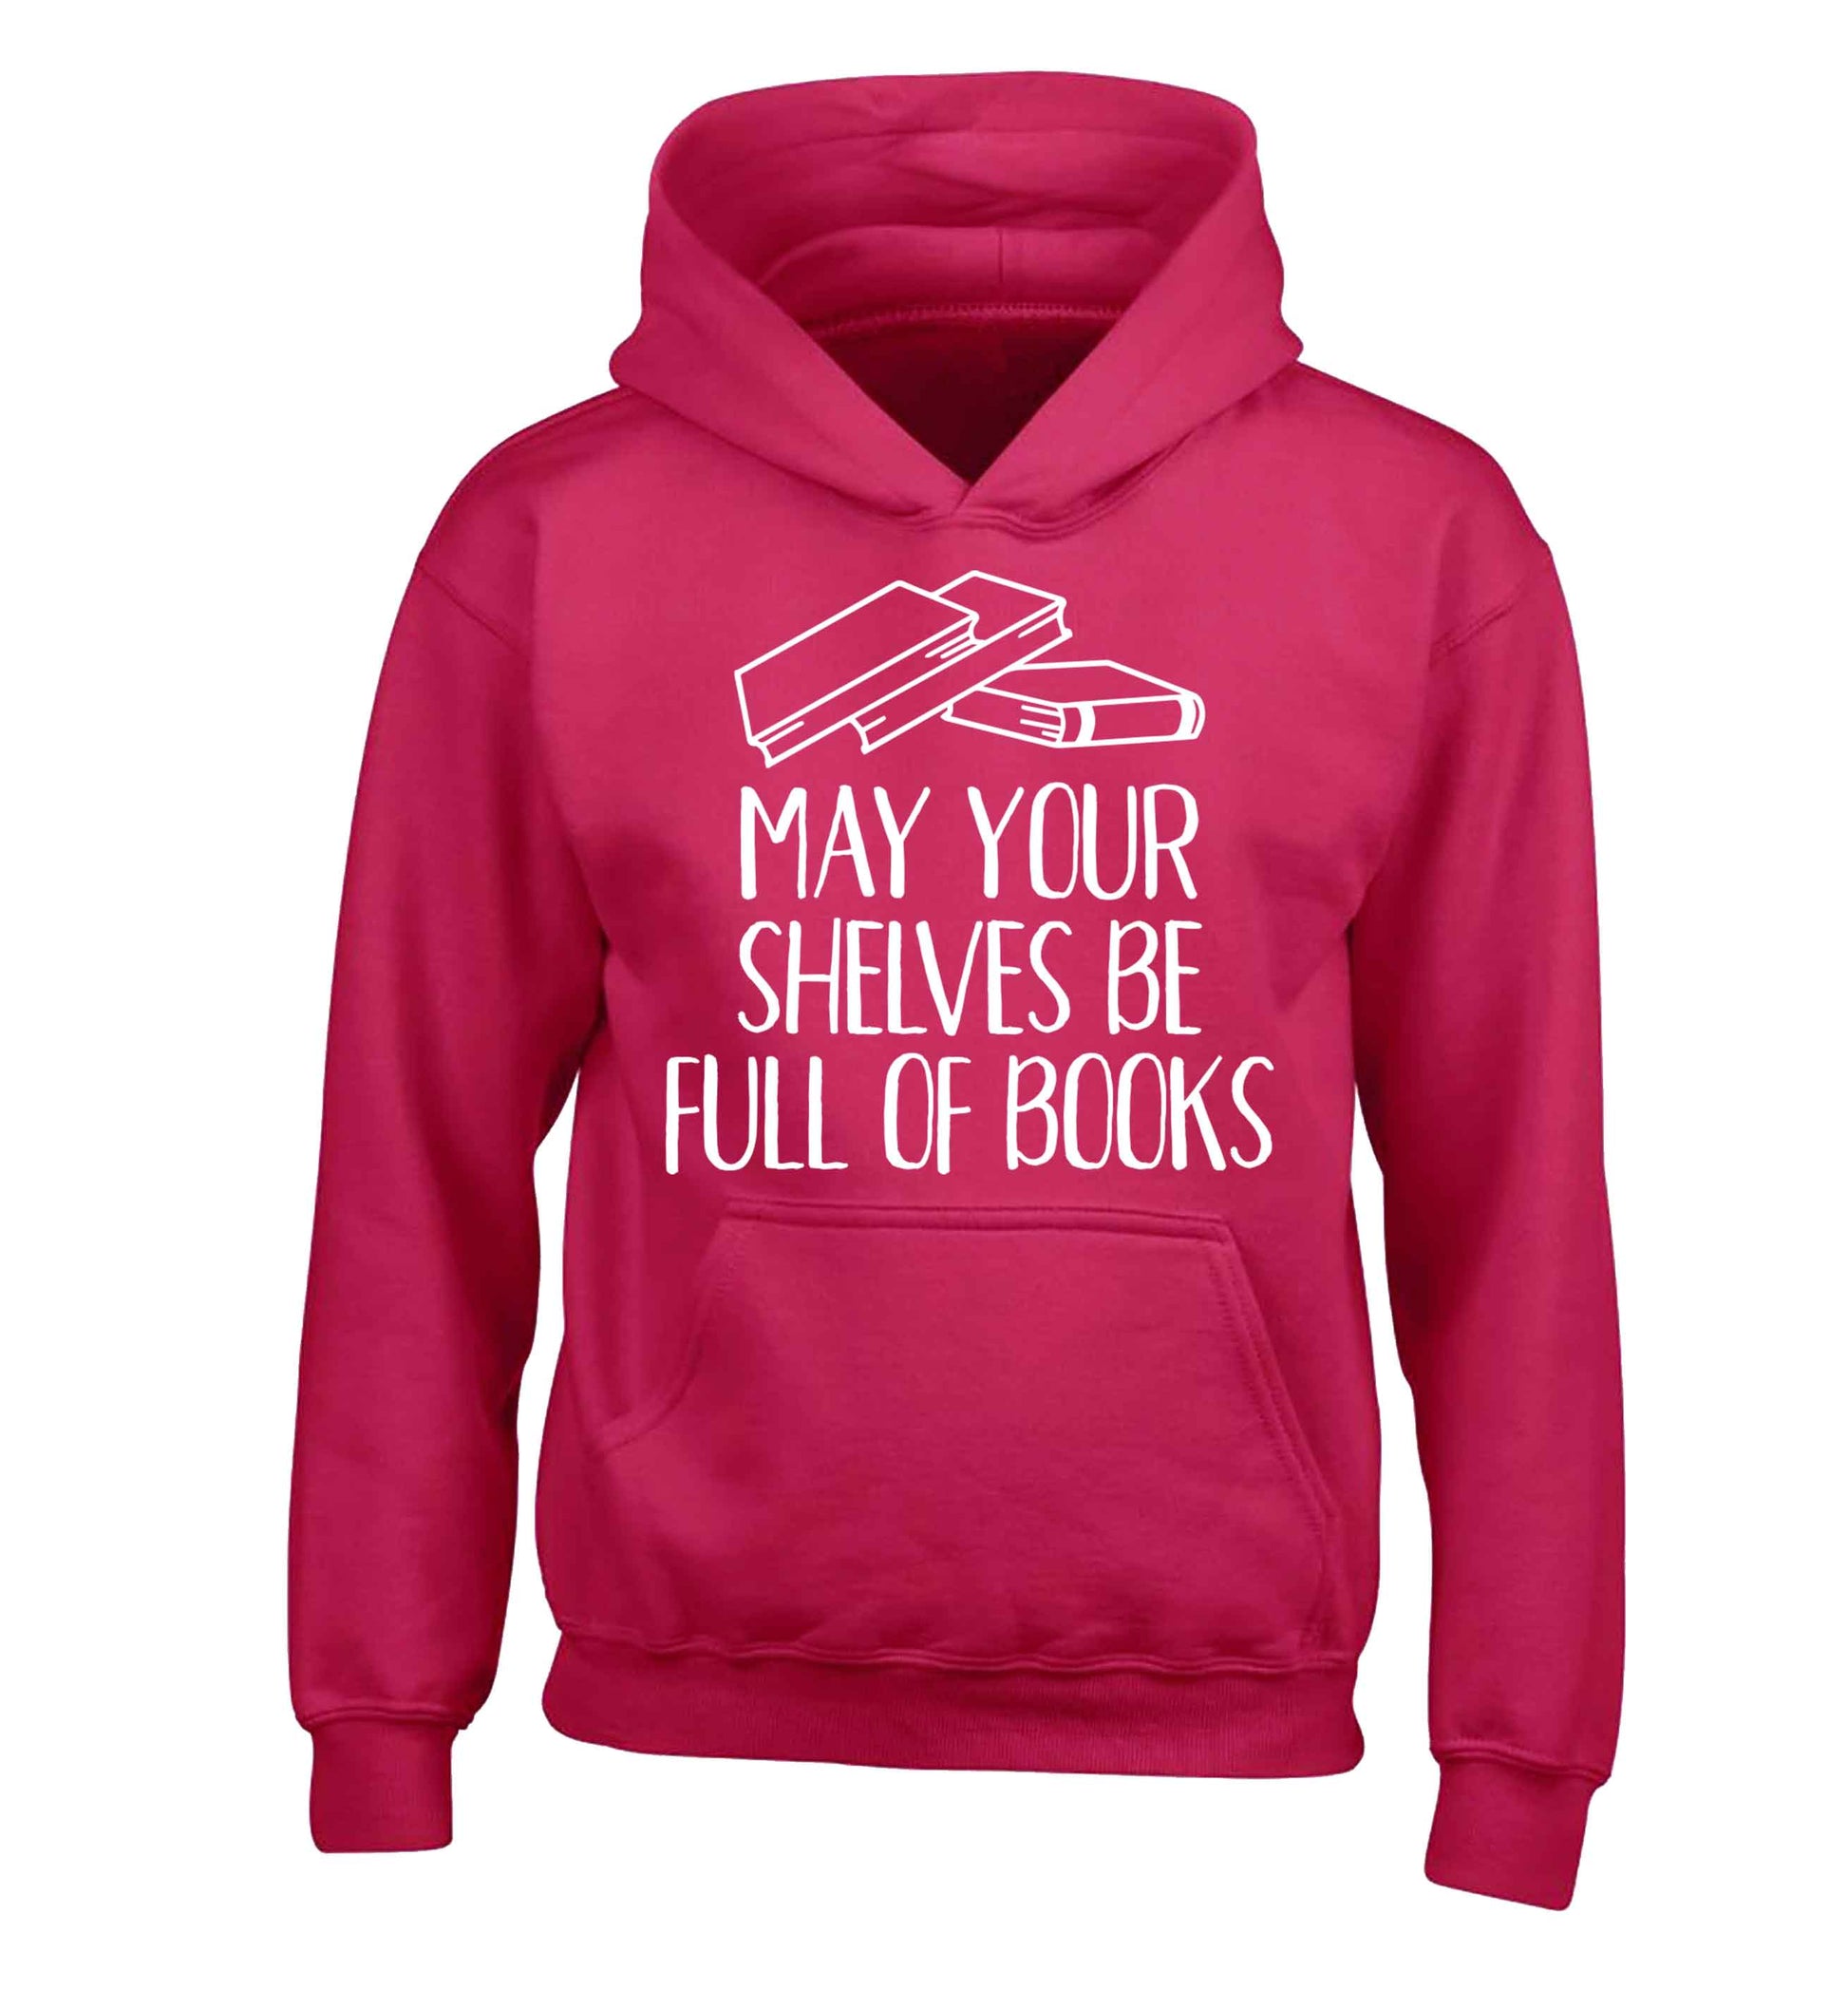 May your shelves be full of books children's pink hoodie 12-13 Years